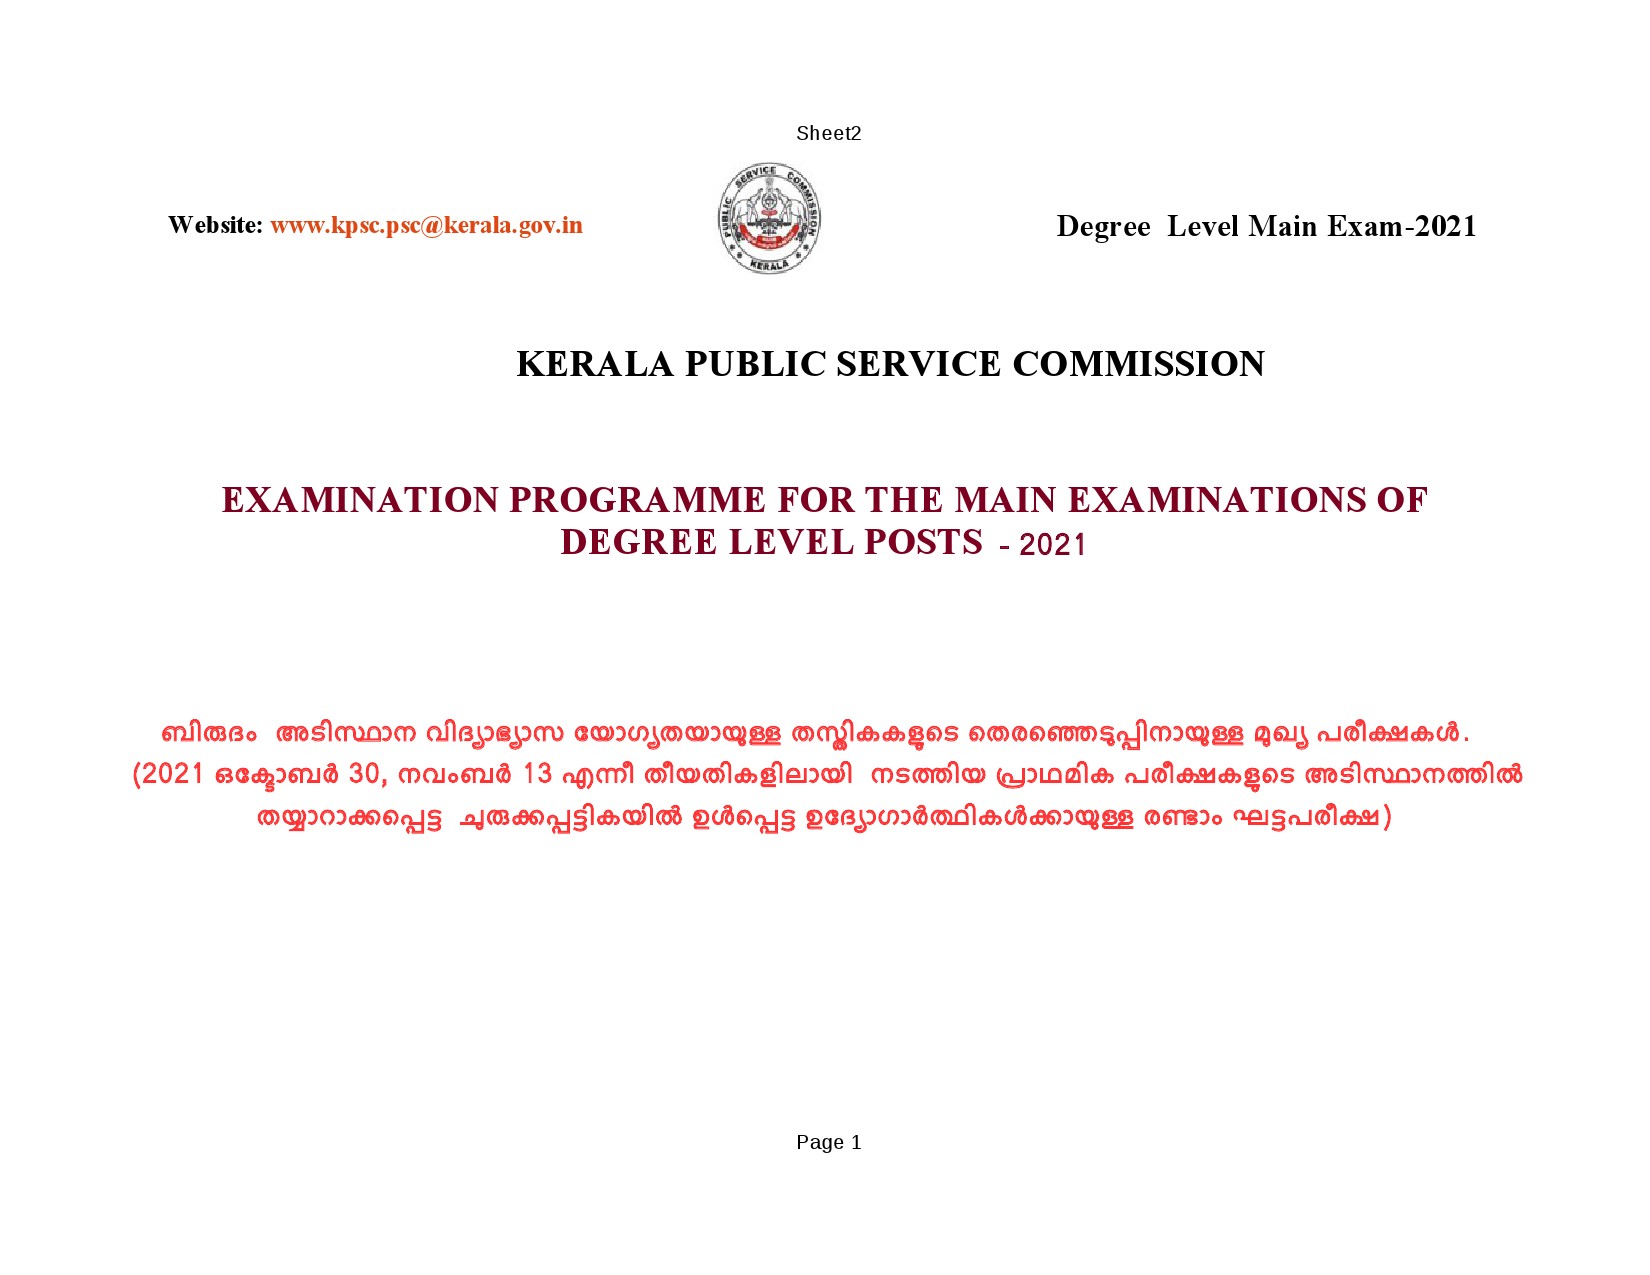 KPSC EXAM FOR THE MAIN EXAMINATIONS OF DEGREE LEVEL POSTS 2021 - Notification Image 1